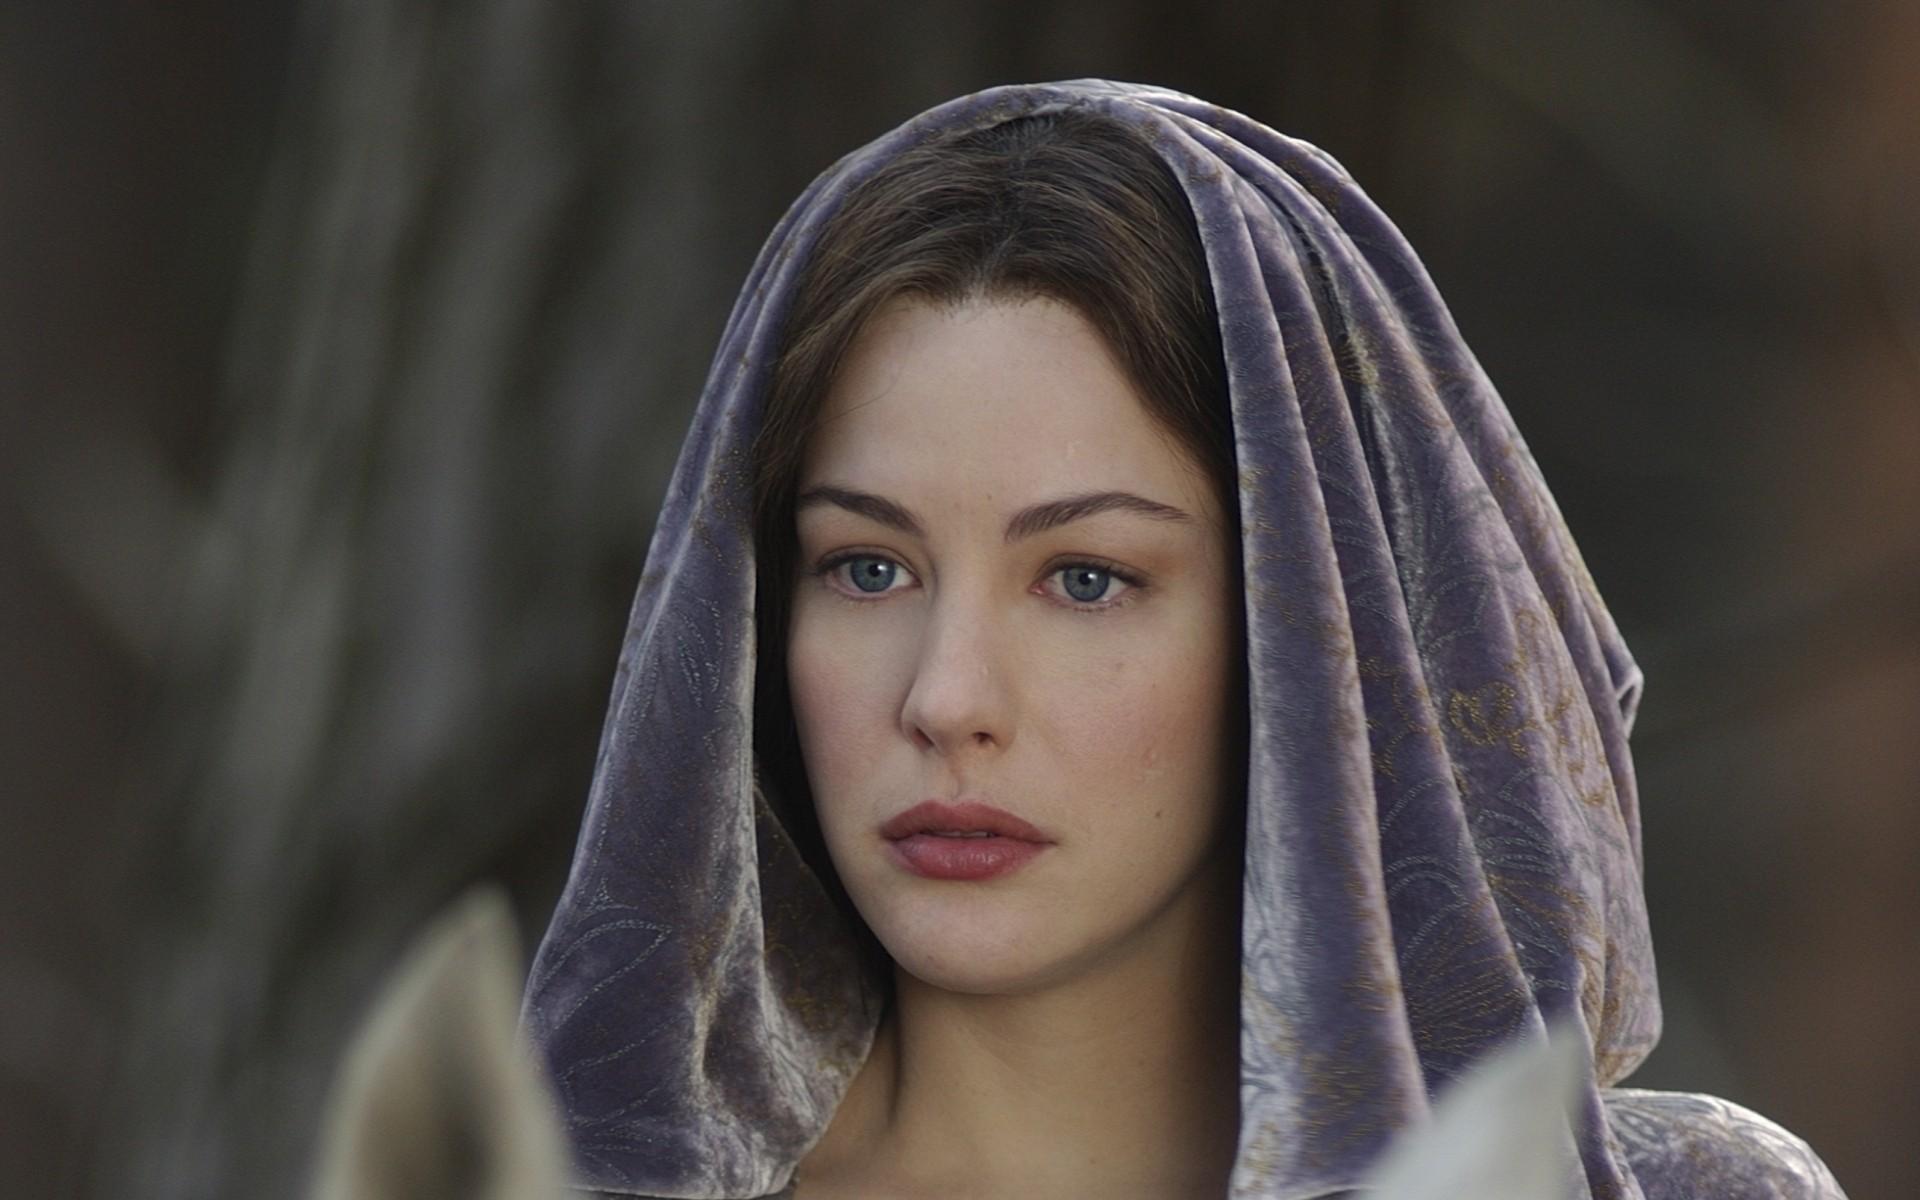 brunettes, women, movies, Liv Tyler, The Lord of the Rings, Arwen